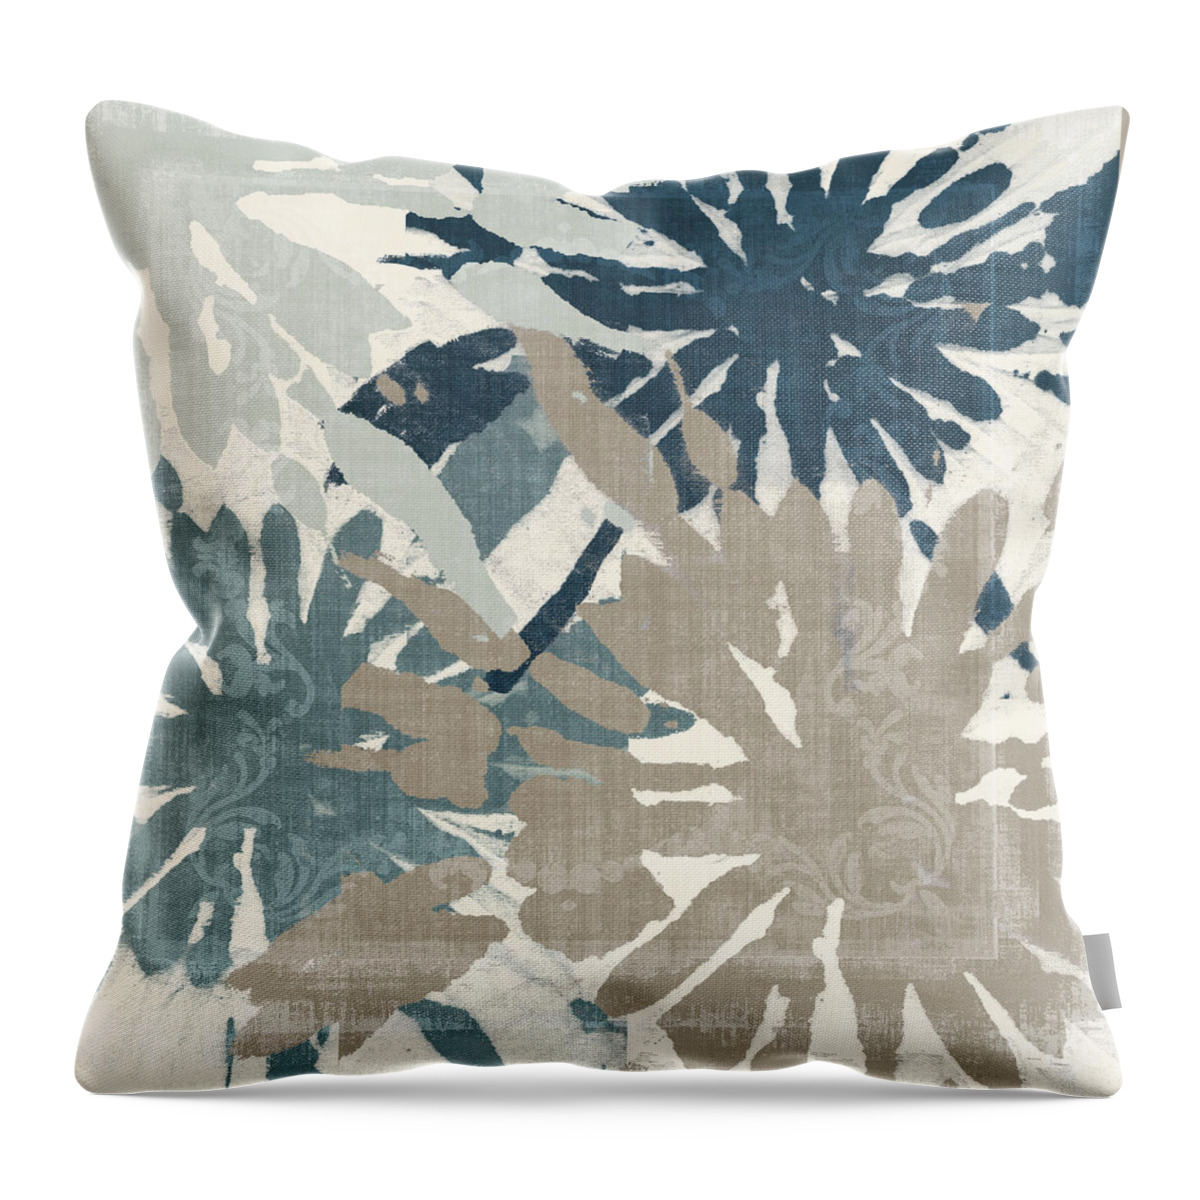 Ikat Throw Pillow featuring the painting Beach Curry IV Ikat by Mindy Sommers